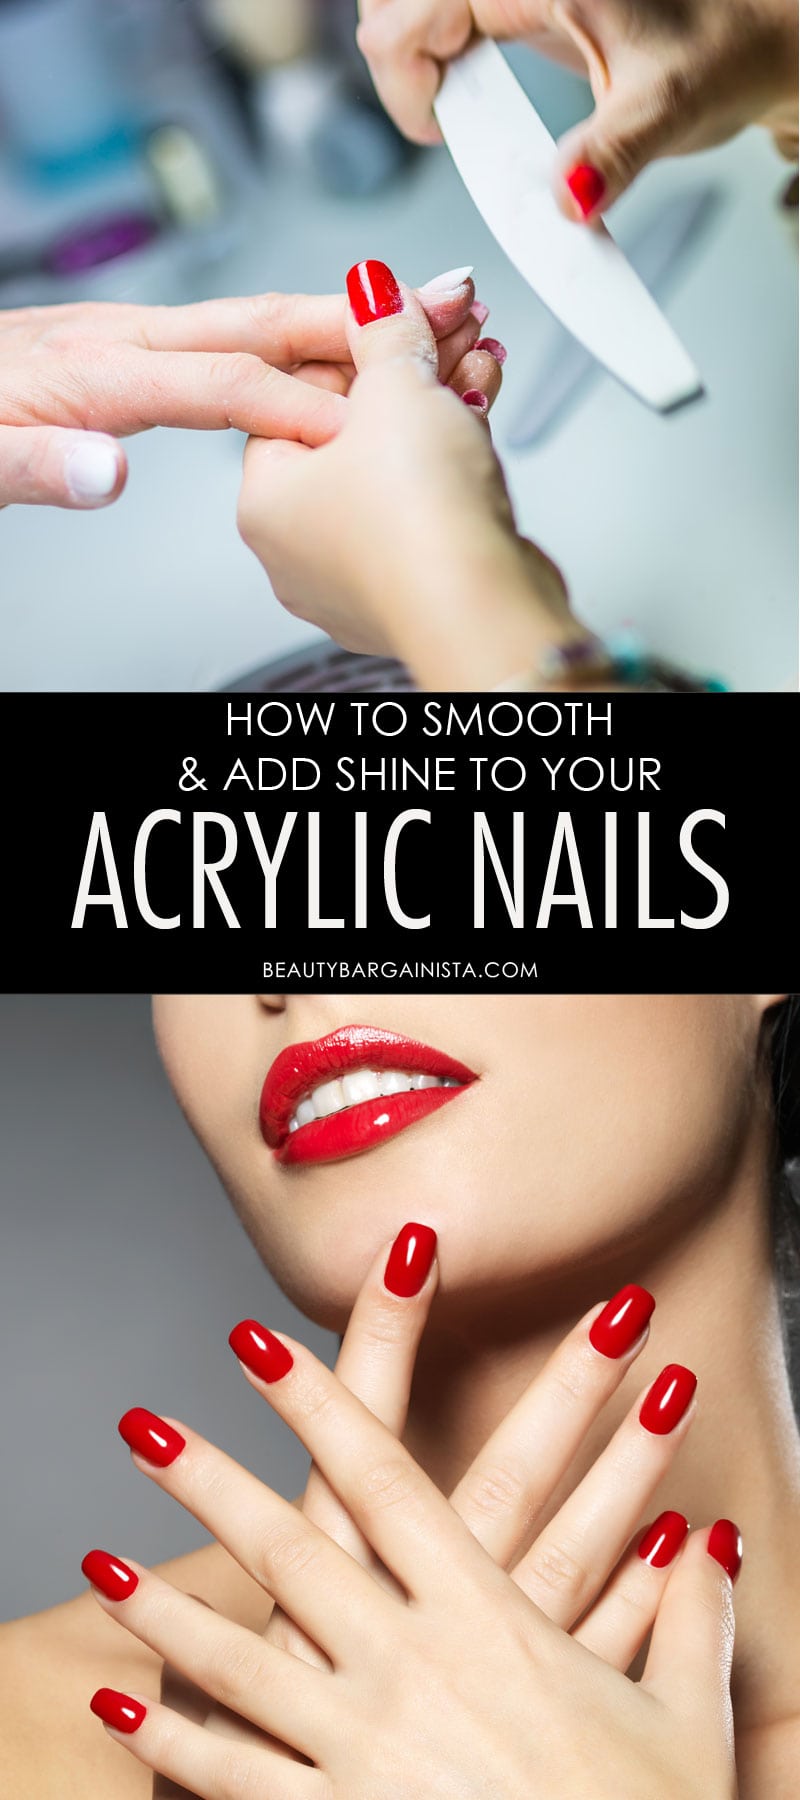 How To Make Acrylic Nails Smooth And Shiny In 4 Simple Steps The Beauty Bargainista